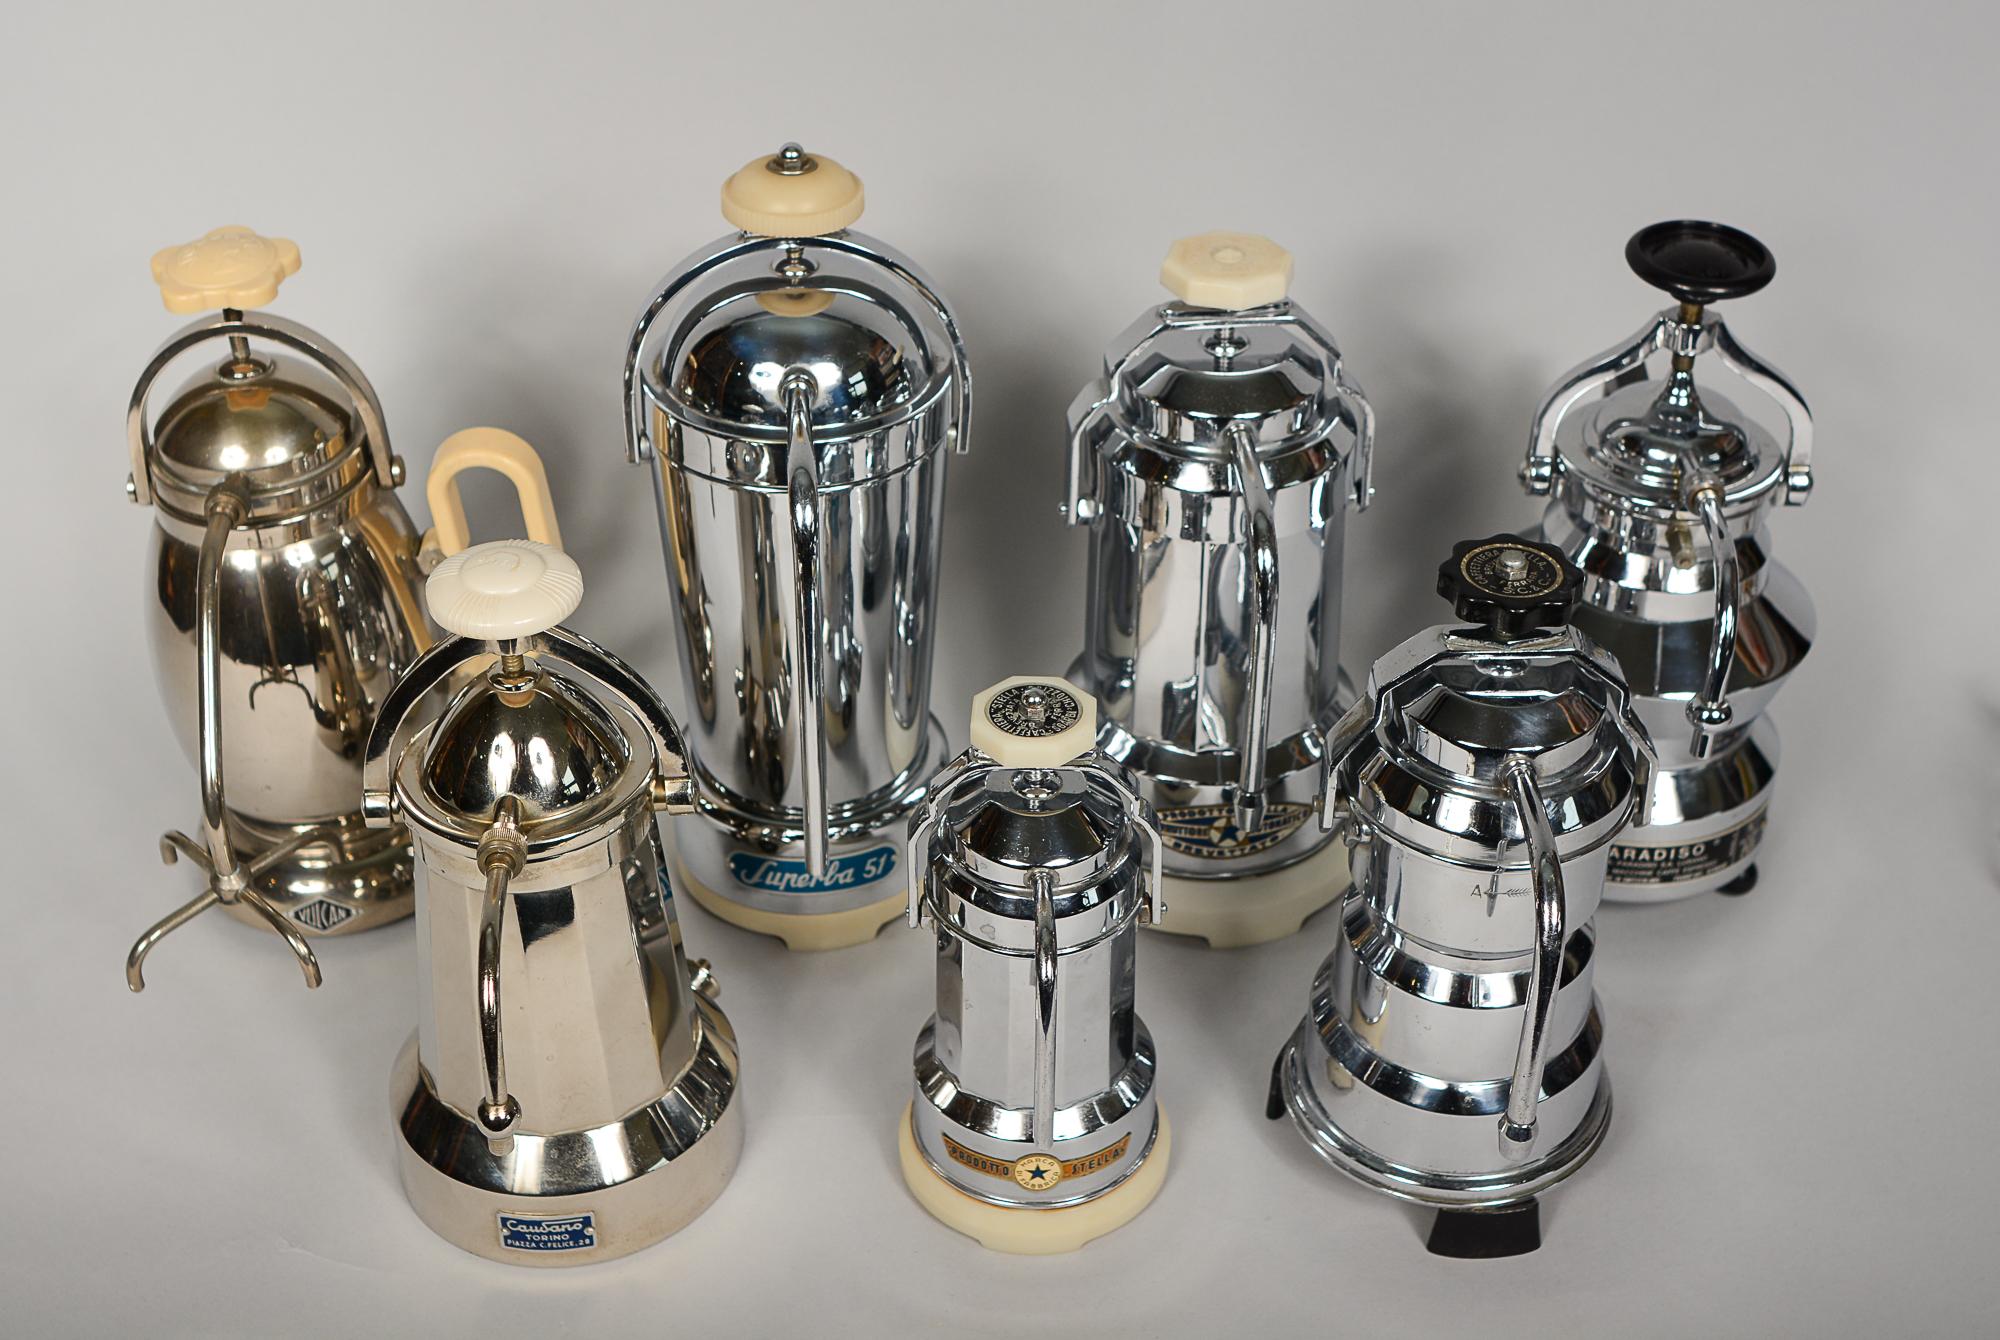 Collection of seven vintage espresso makers. Five of these have a chrome and nickel plate finish. There is a Paradiso, a Causano, two different Prodotto Stellas, a Superba 51, a Caffettiera Stella and a Vulcan. These are sold as decorative items and